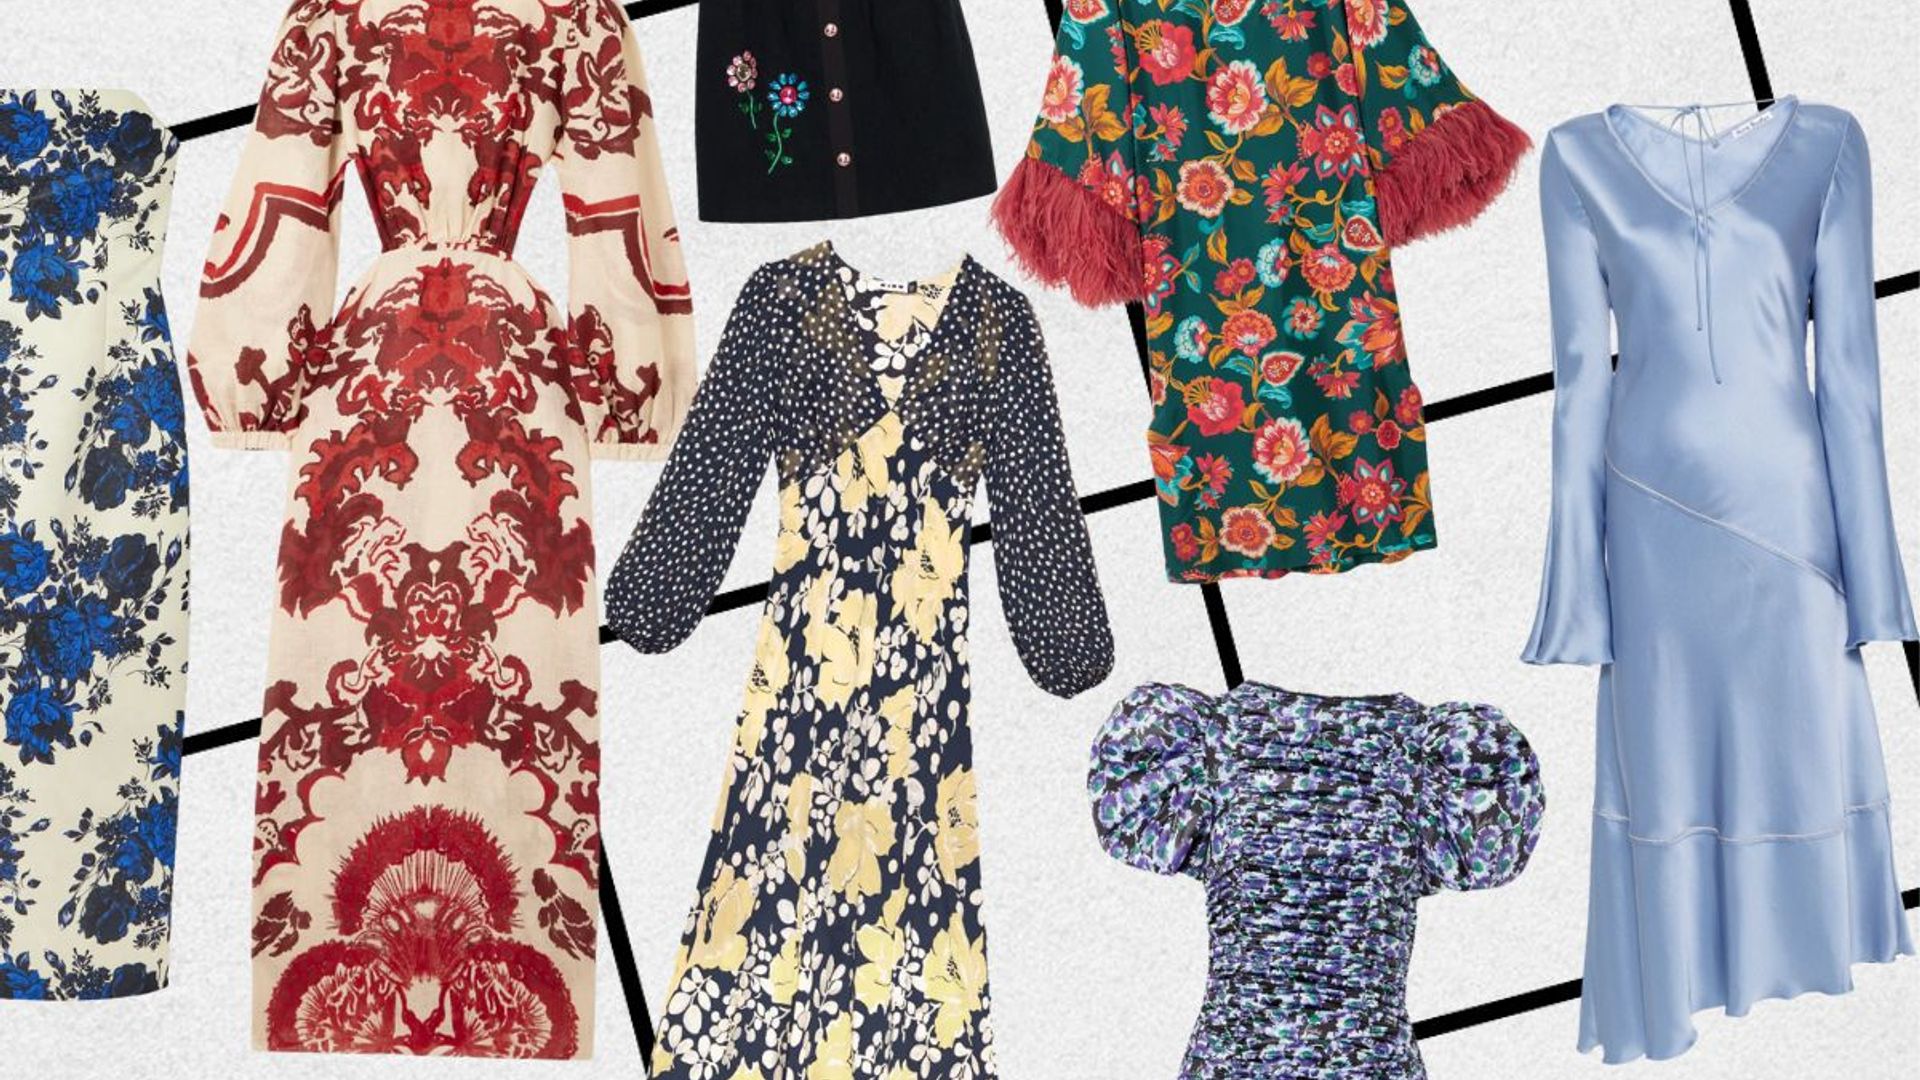 See our editors 9 favorite spring dresses from